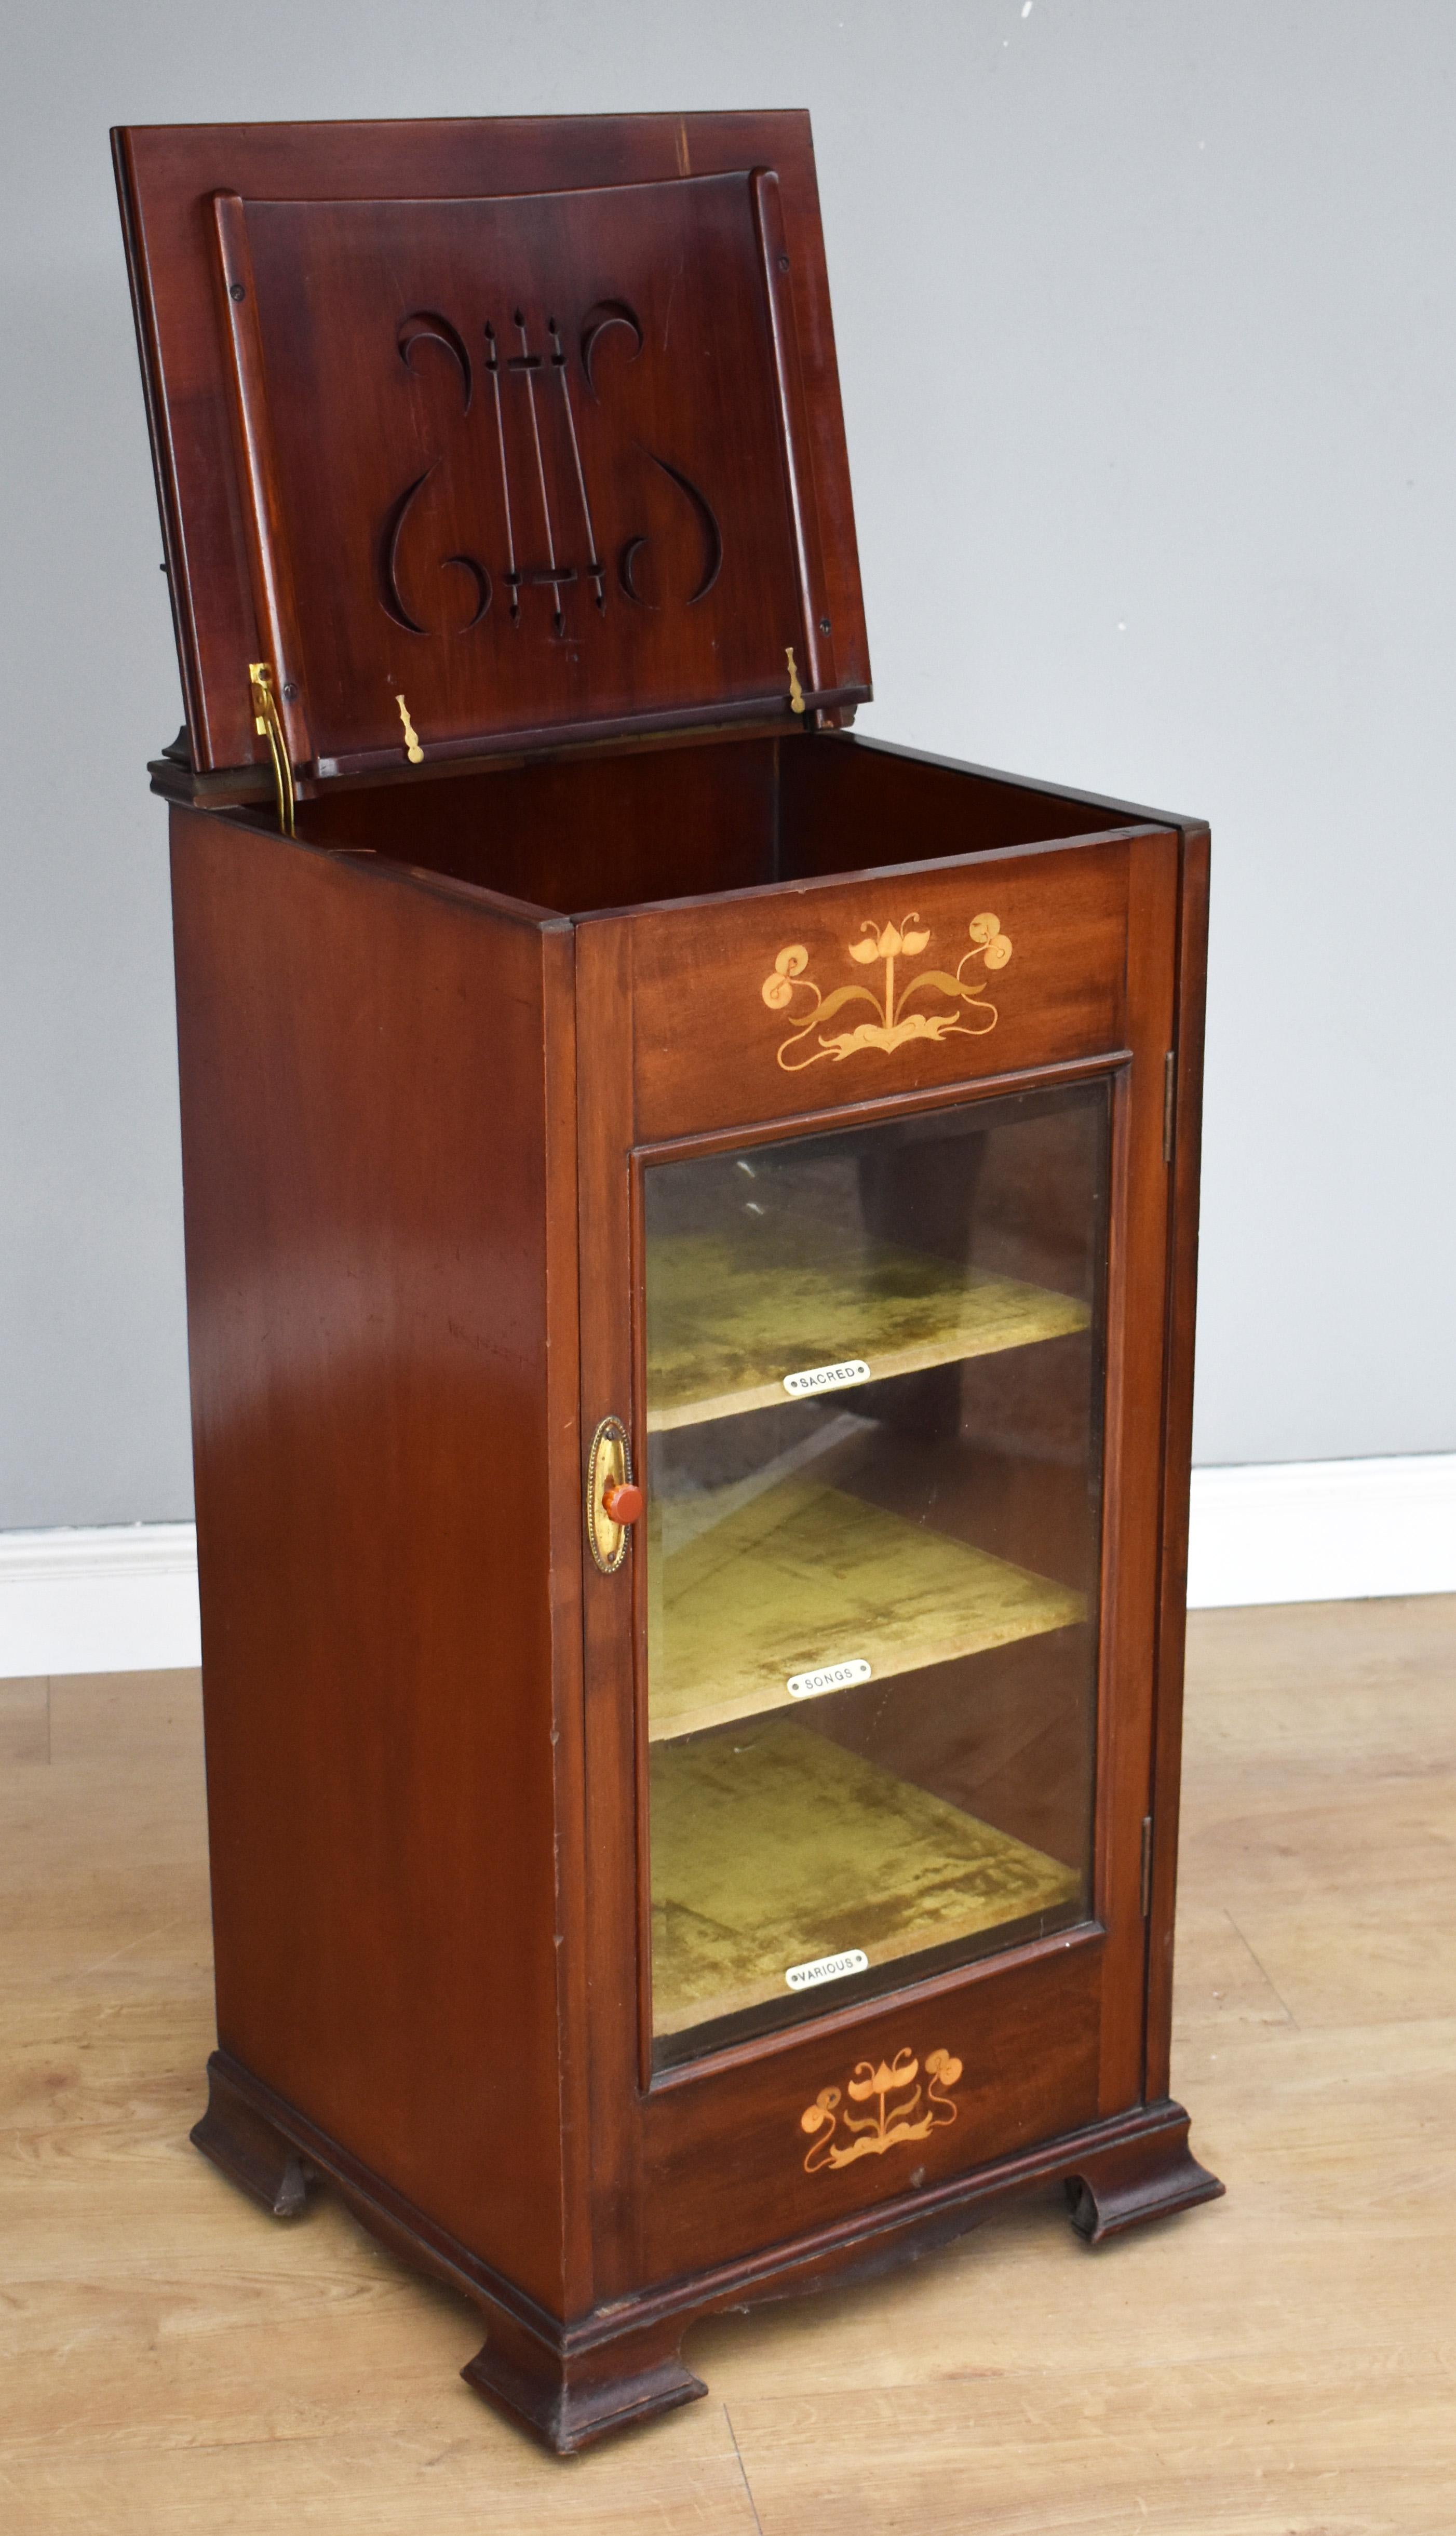 For sale is a good quality Victorian mahogany inlaid Art Nouveau music cabinet, having a raised inlaid gallery above a hinged lid, opening to reveal a lire shaped music holder above storage space. With a single glass door opening to reveal a fabric